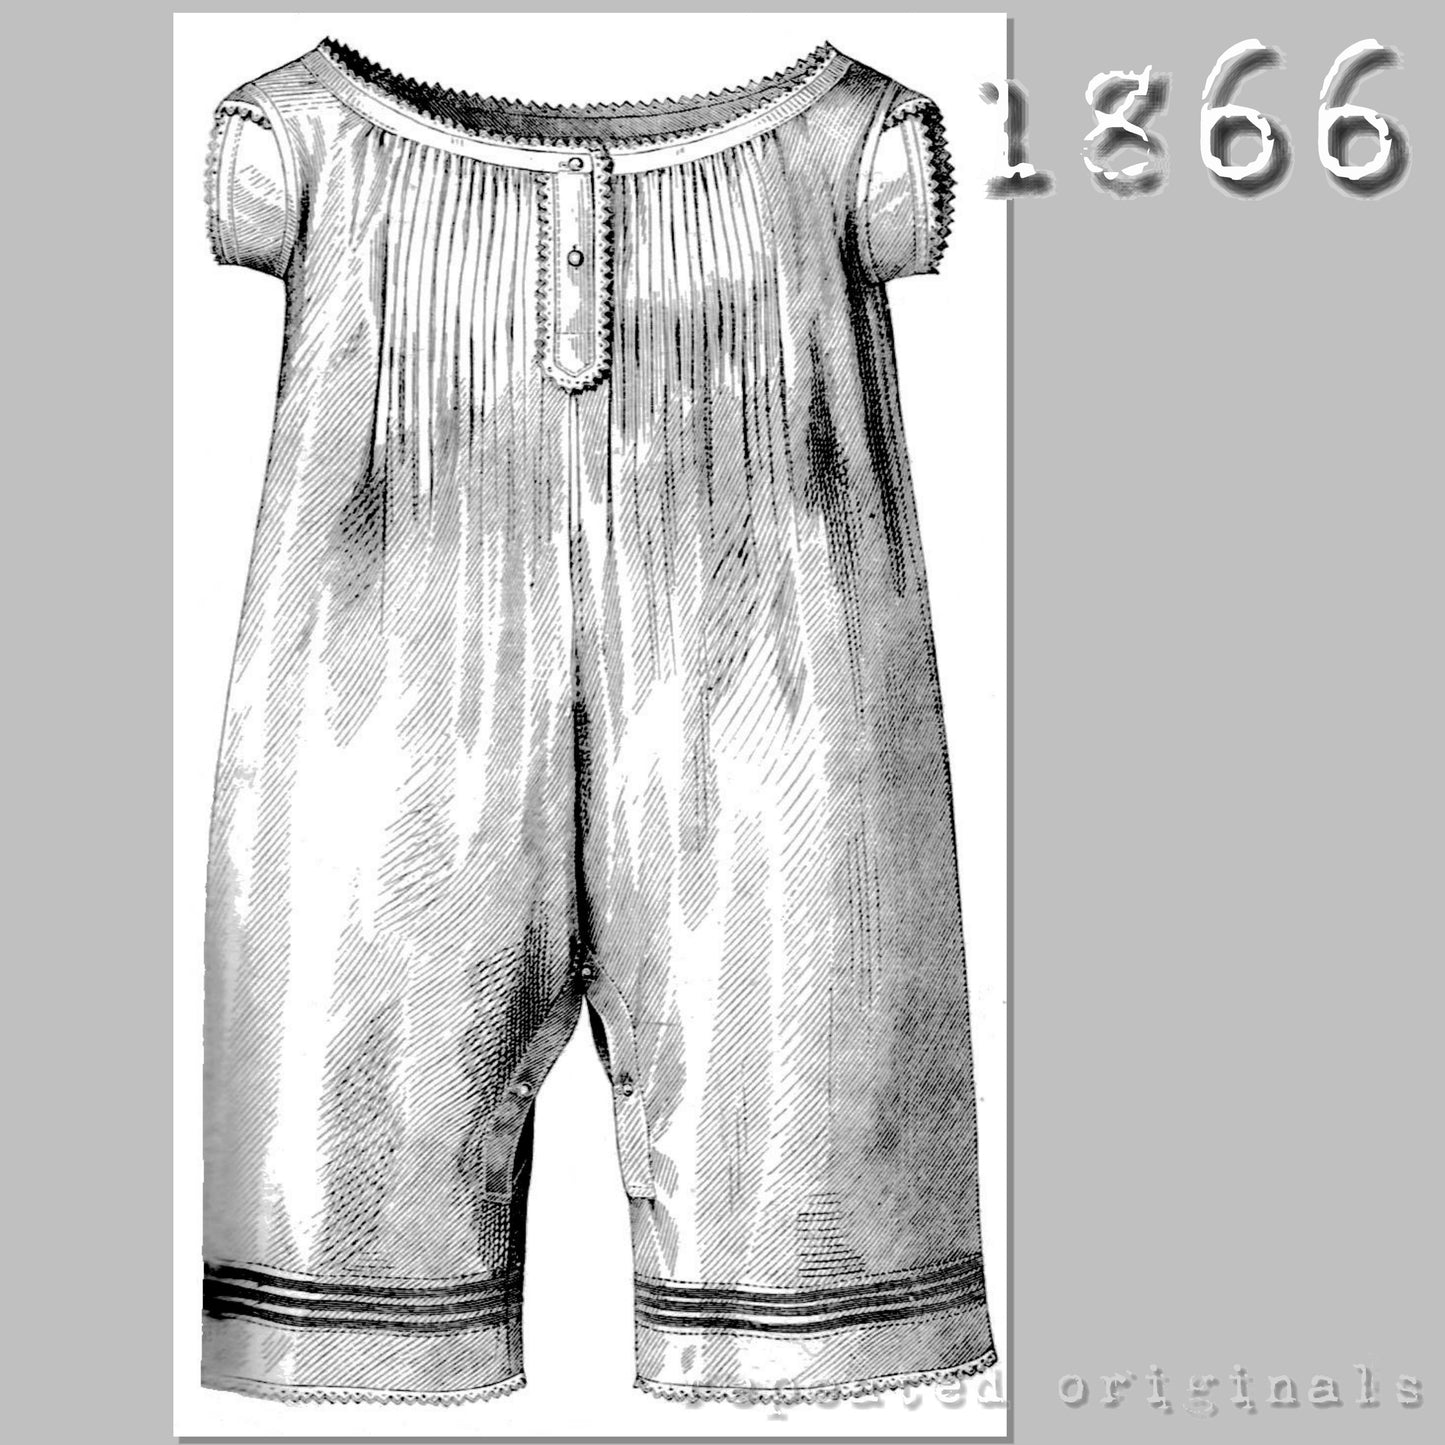 1866 Ladies' Chemise and Drawers Combination Sewing Pattern - INSTANT DOWNLOAD PDF